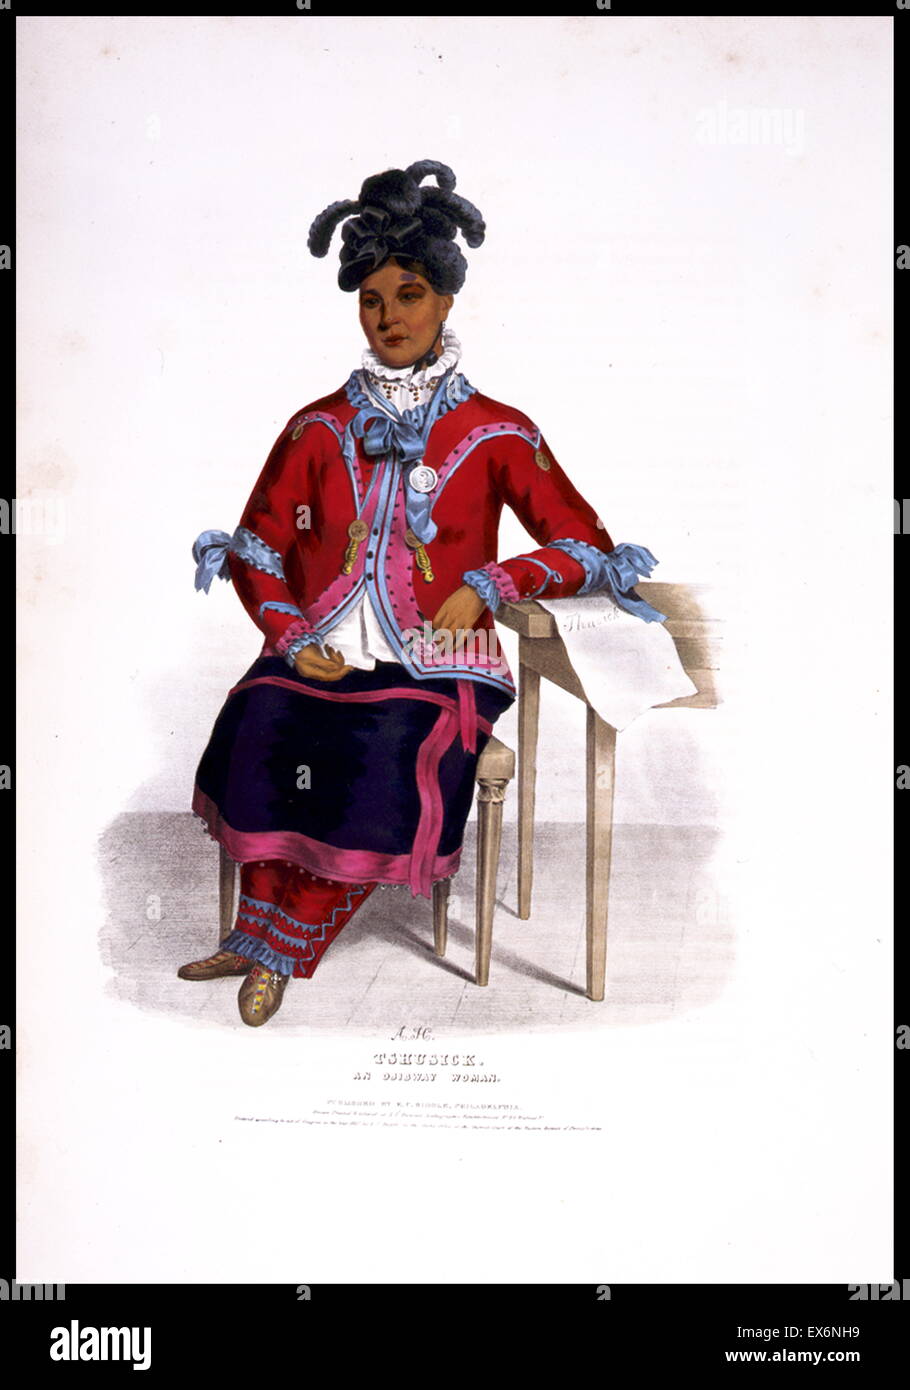 An Ojibway woman with left arm resting on a table on which is a paper with her name on it, spelled 'Thusick'. The Ojibwe (or Chippewa) are one of the largest groups of Native Americans in North America. Stock Photo